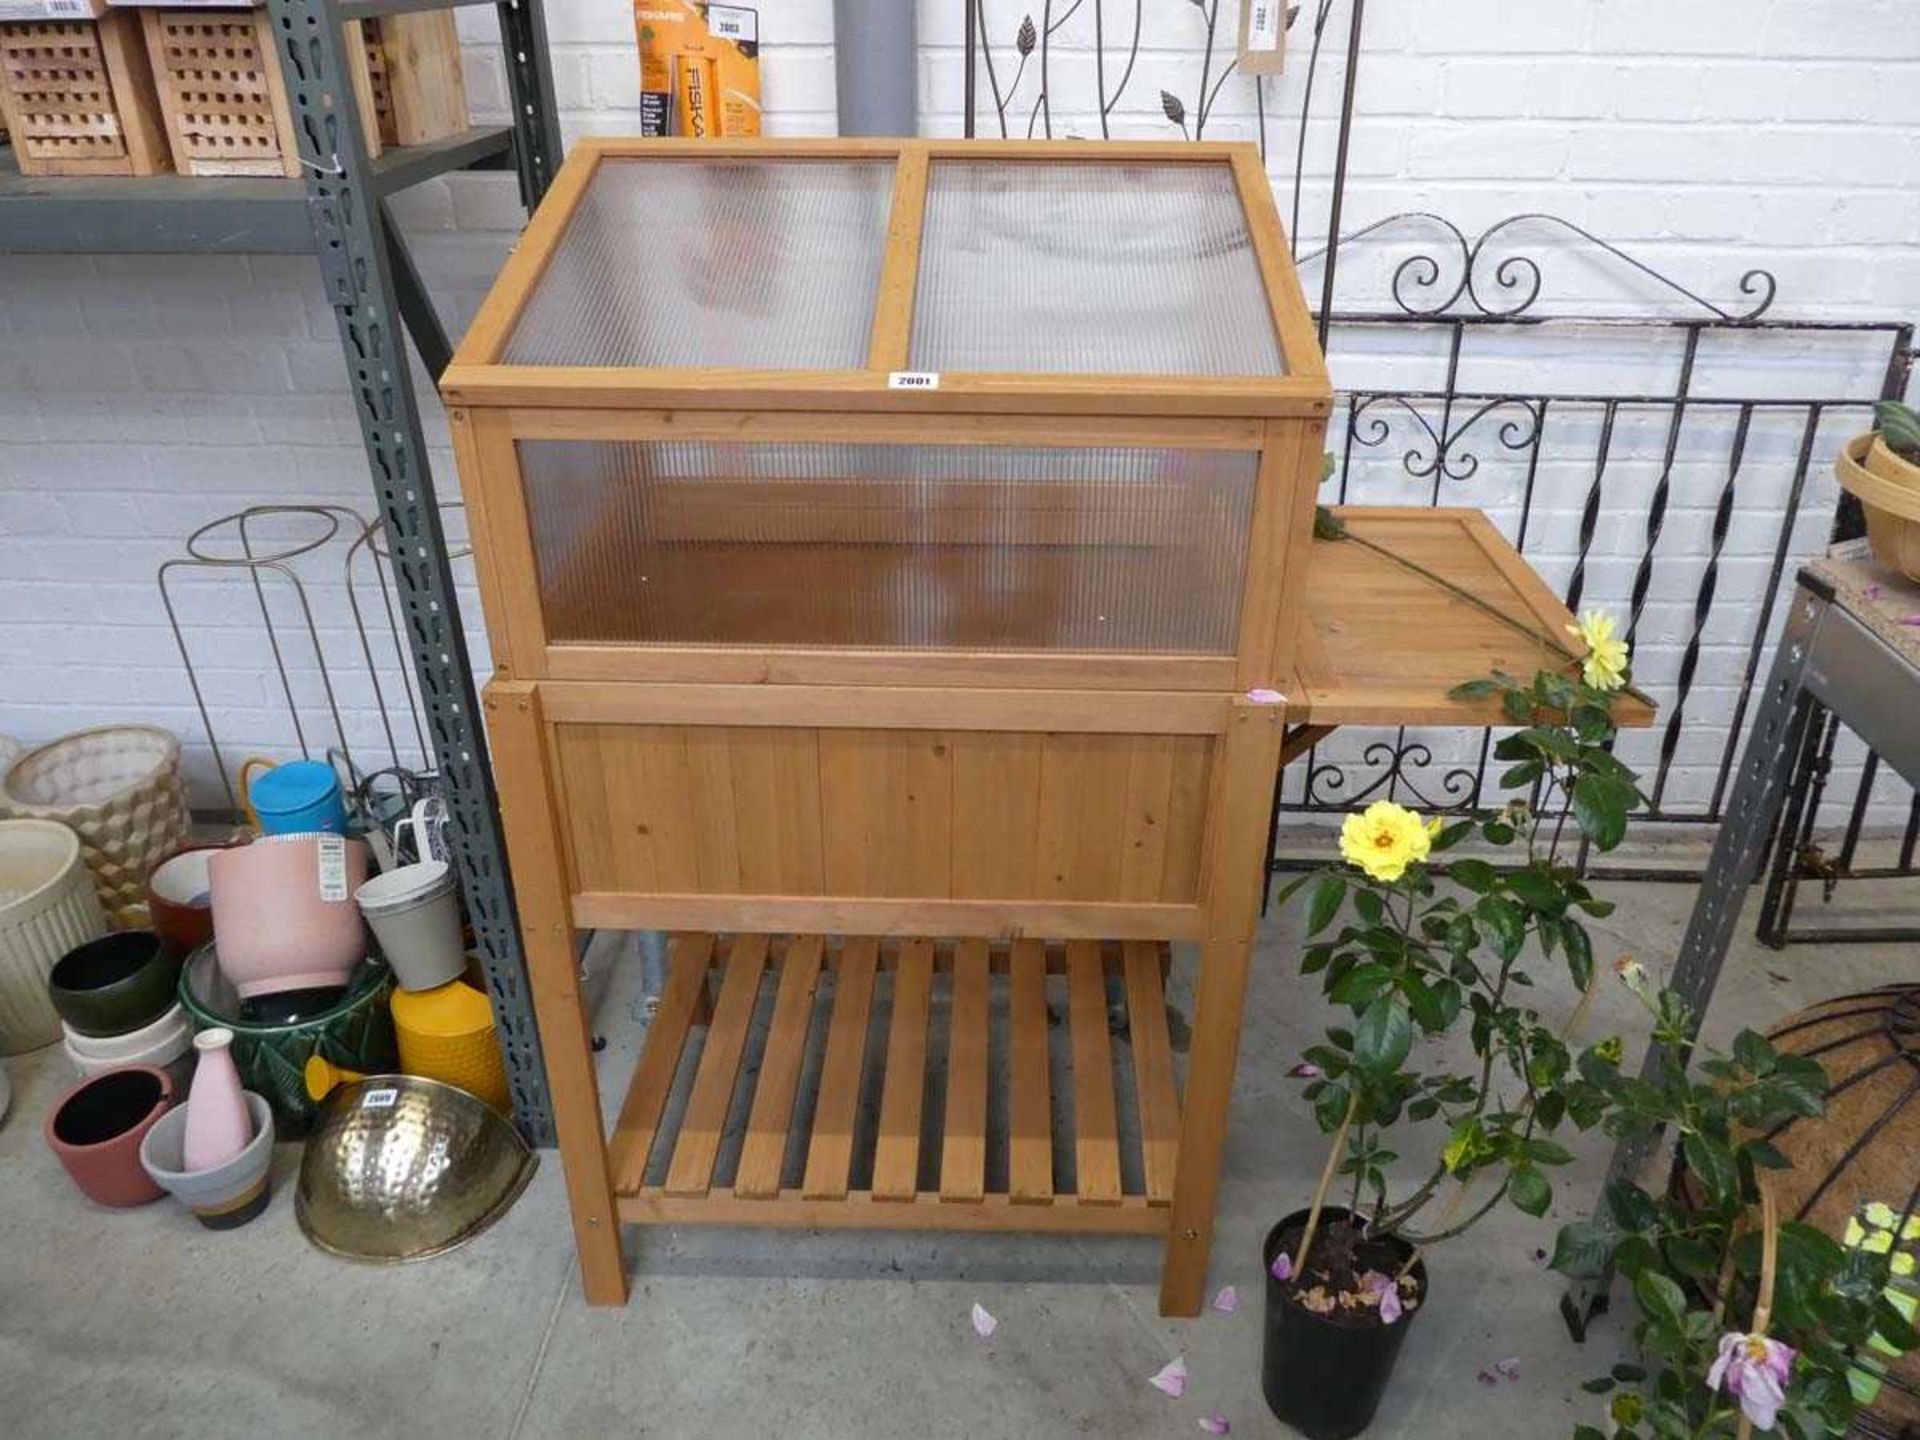 Wooden lift-top cold frame with shelf under